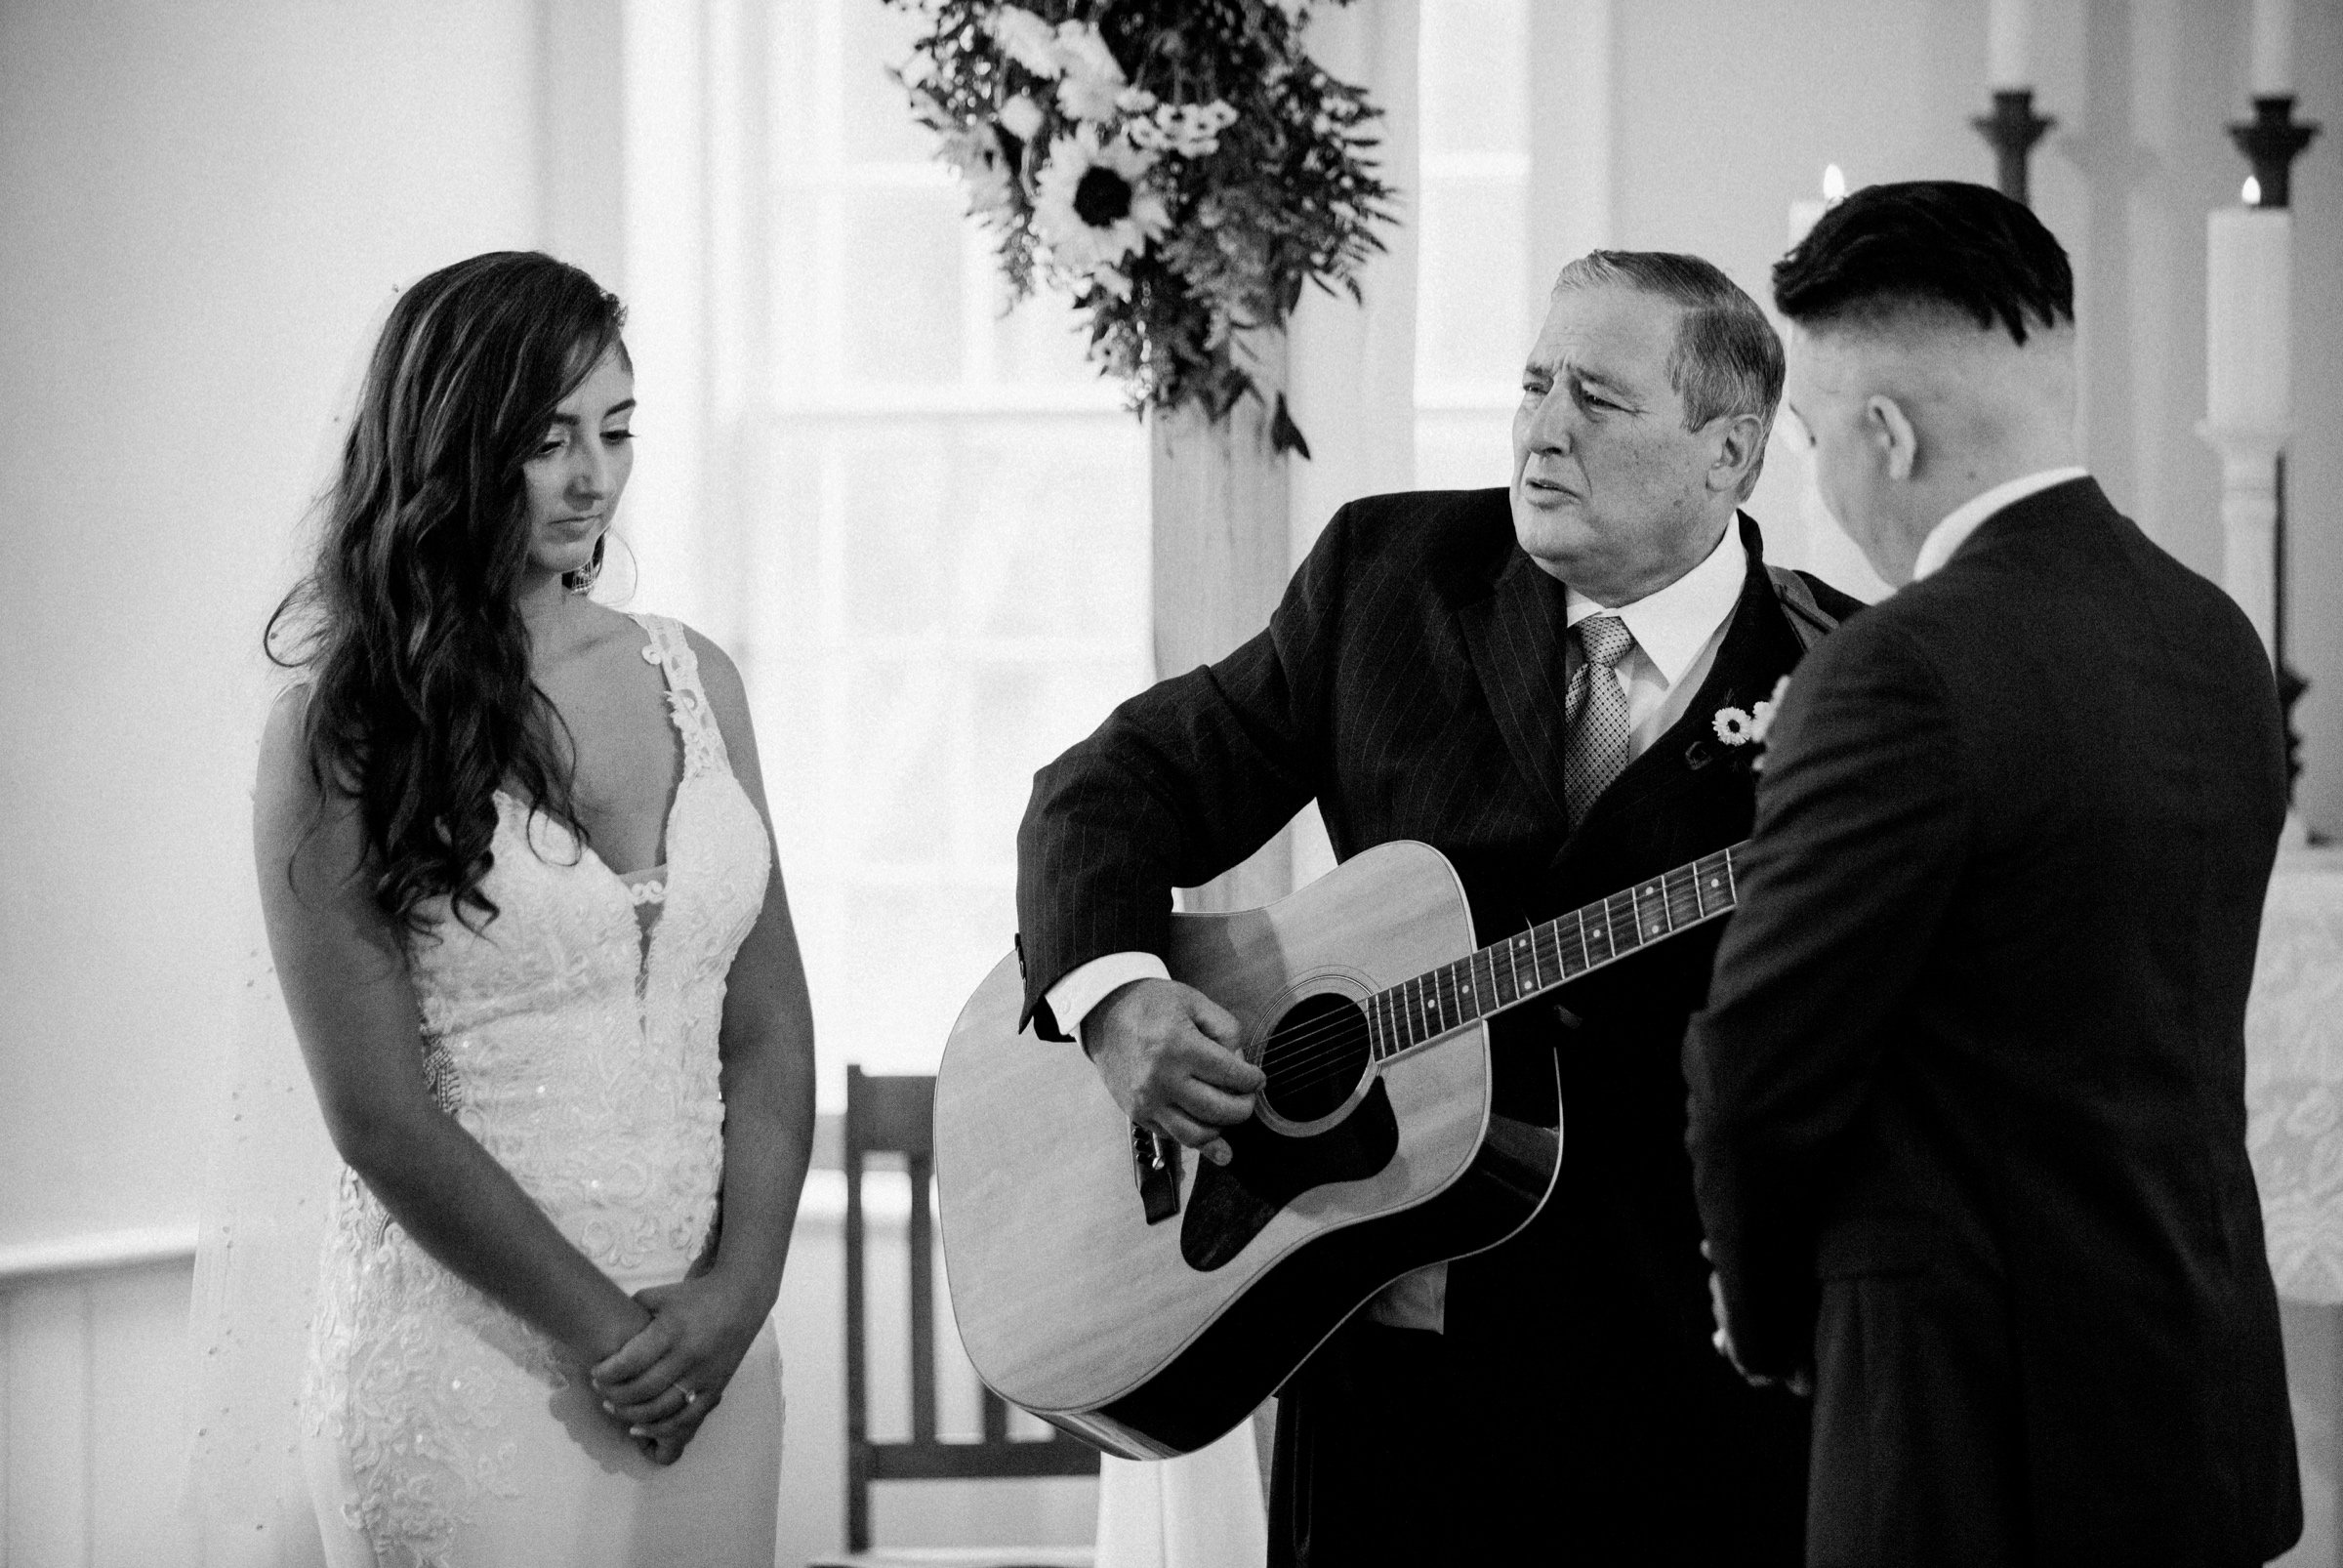 21_sentimental song at rainy wedding day allaire village.jpg